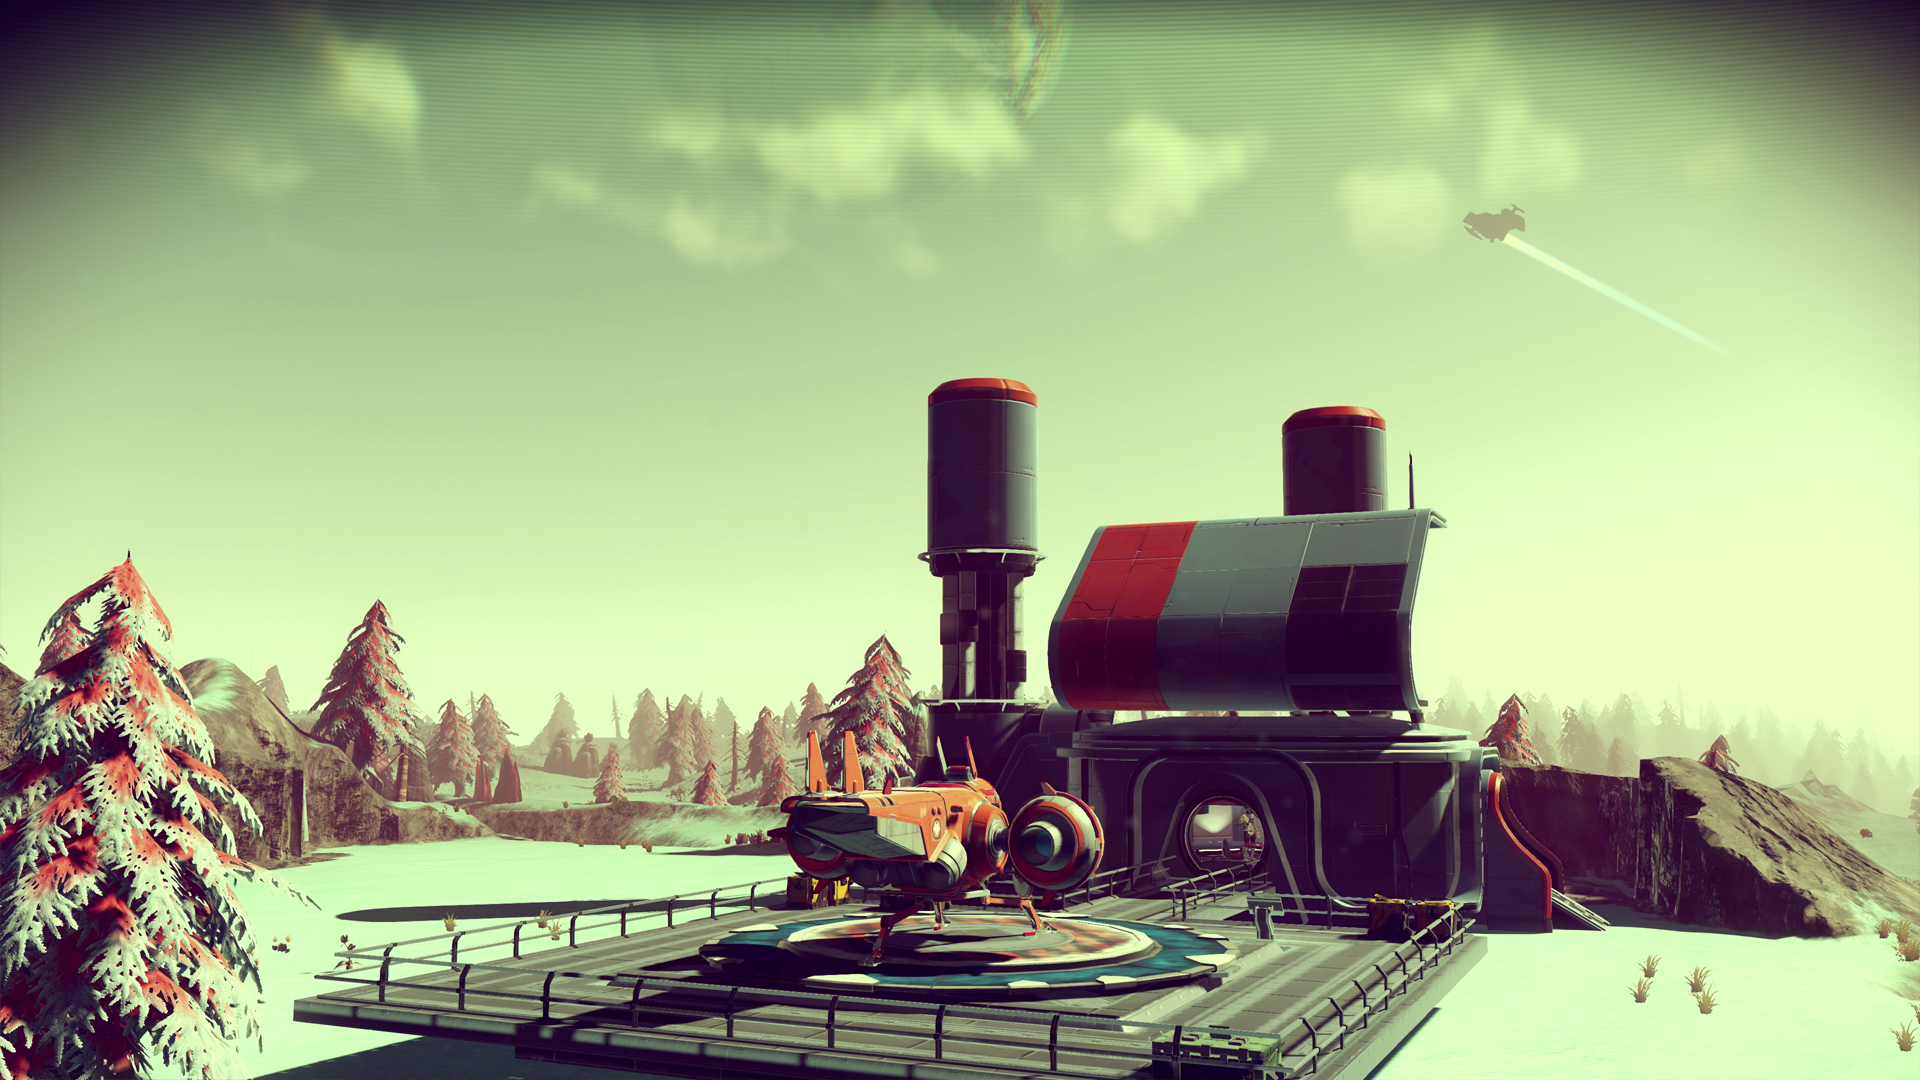 Nms3 - Trading Post No Man's Sky , HD Wallpaper & Backgrounds